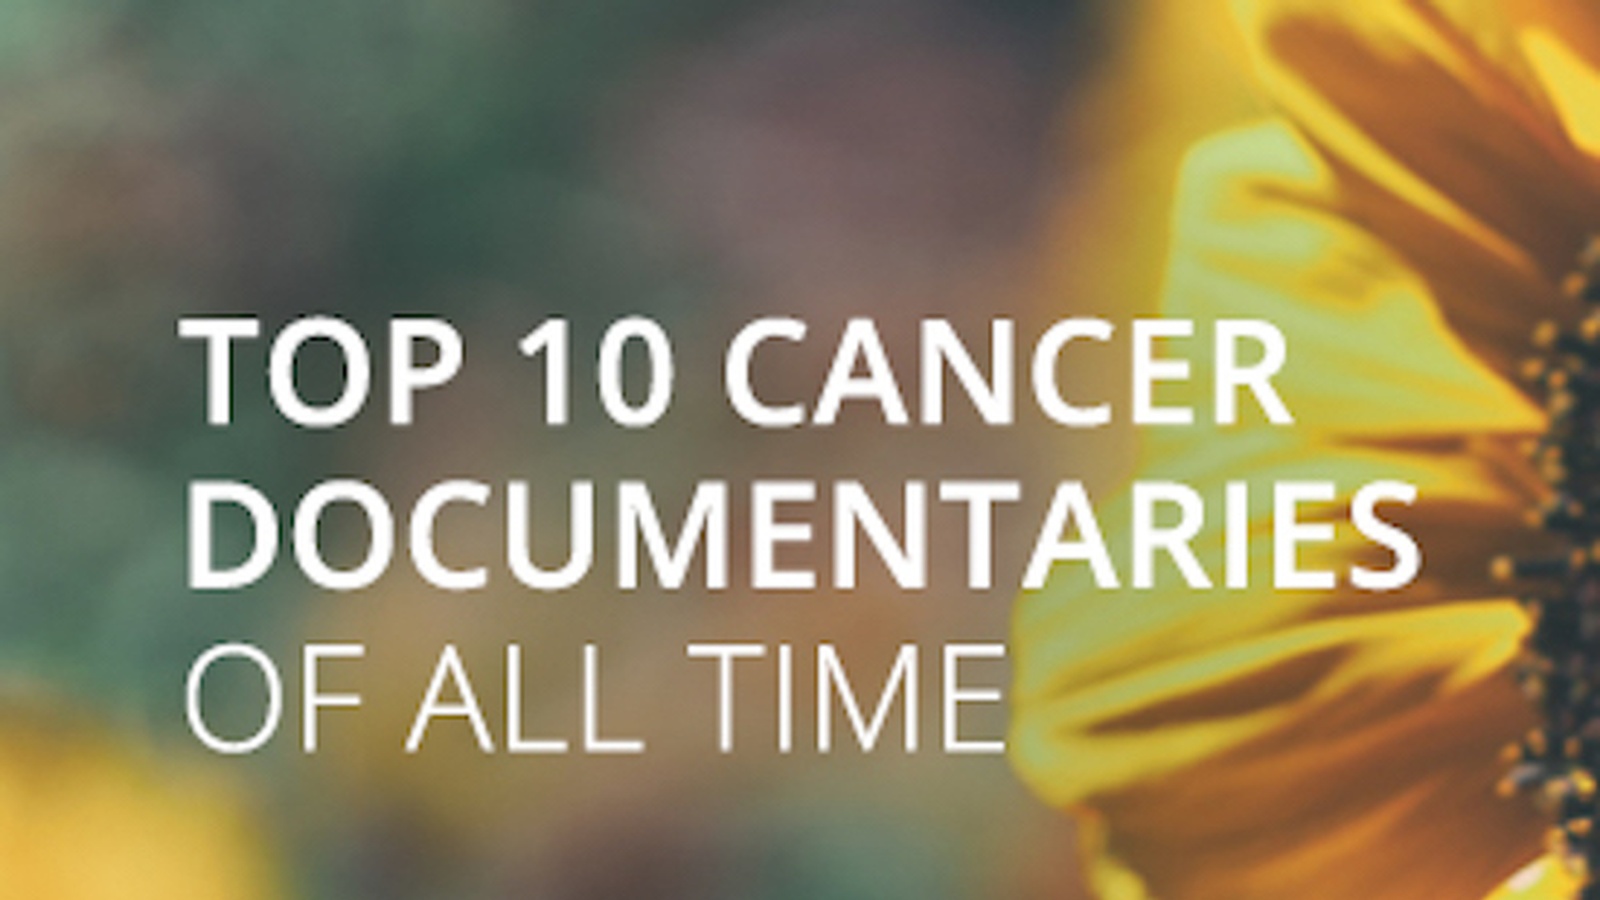 Top 10 Cancer Documentaries Of All Time